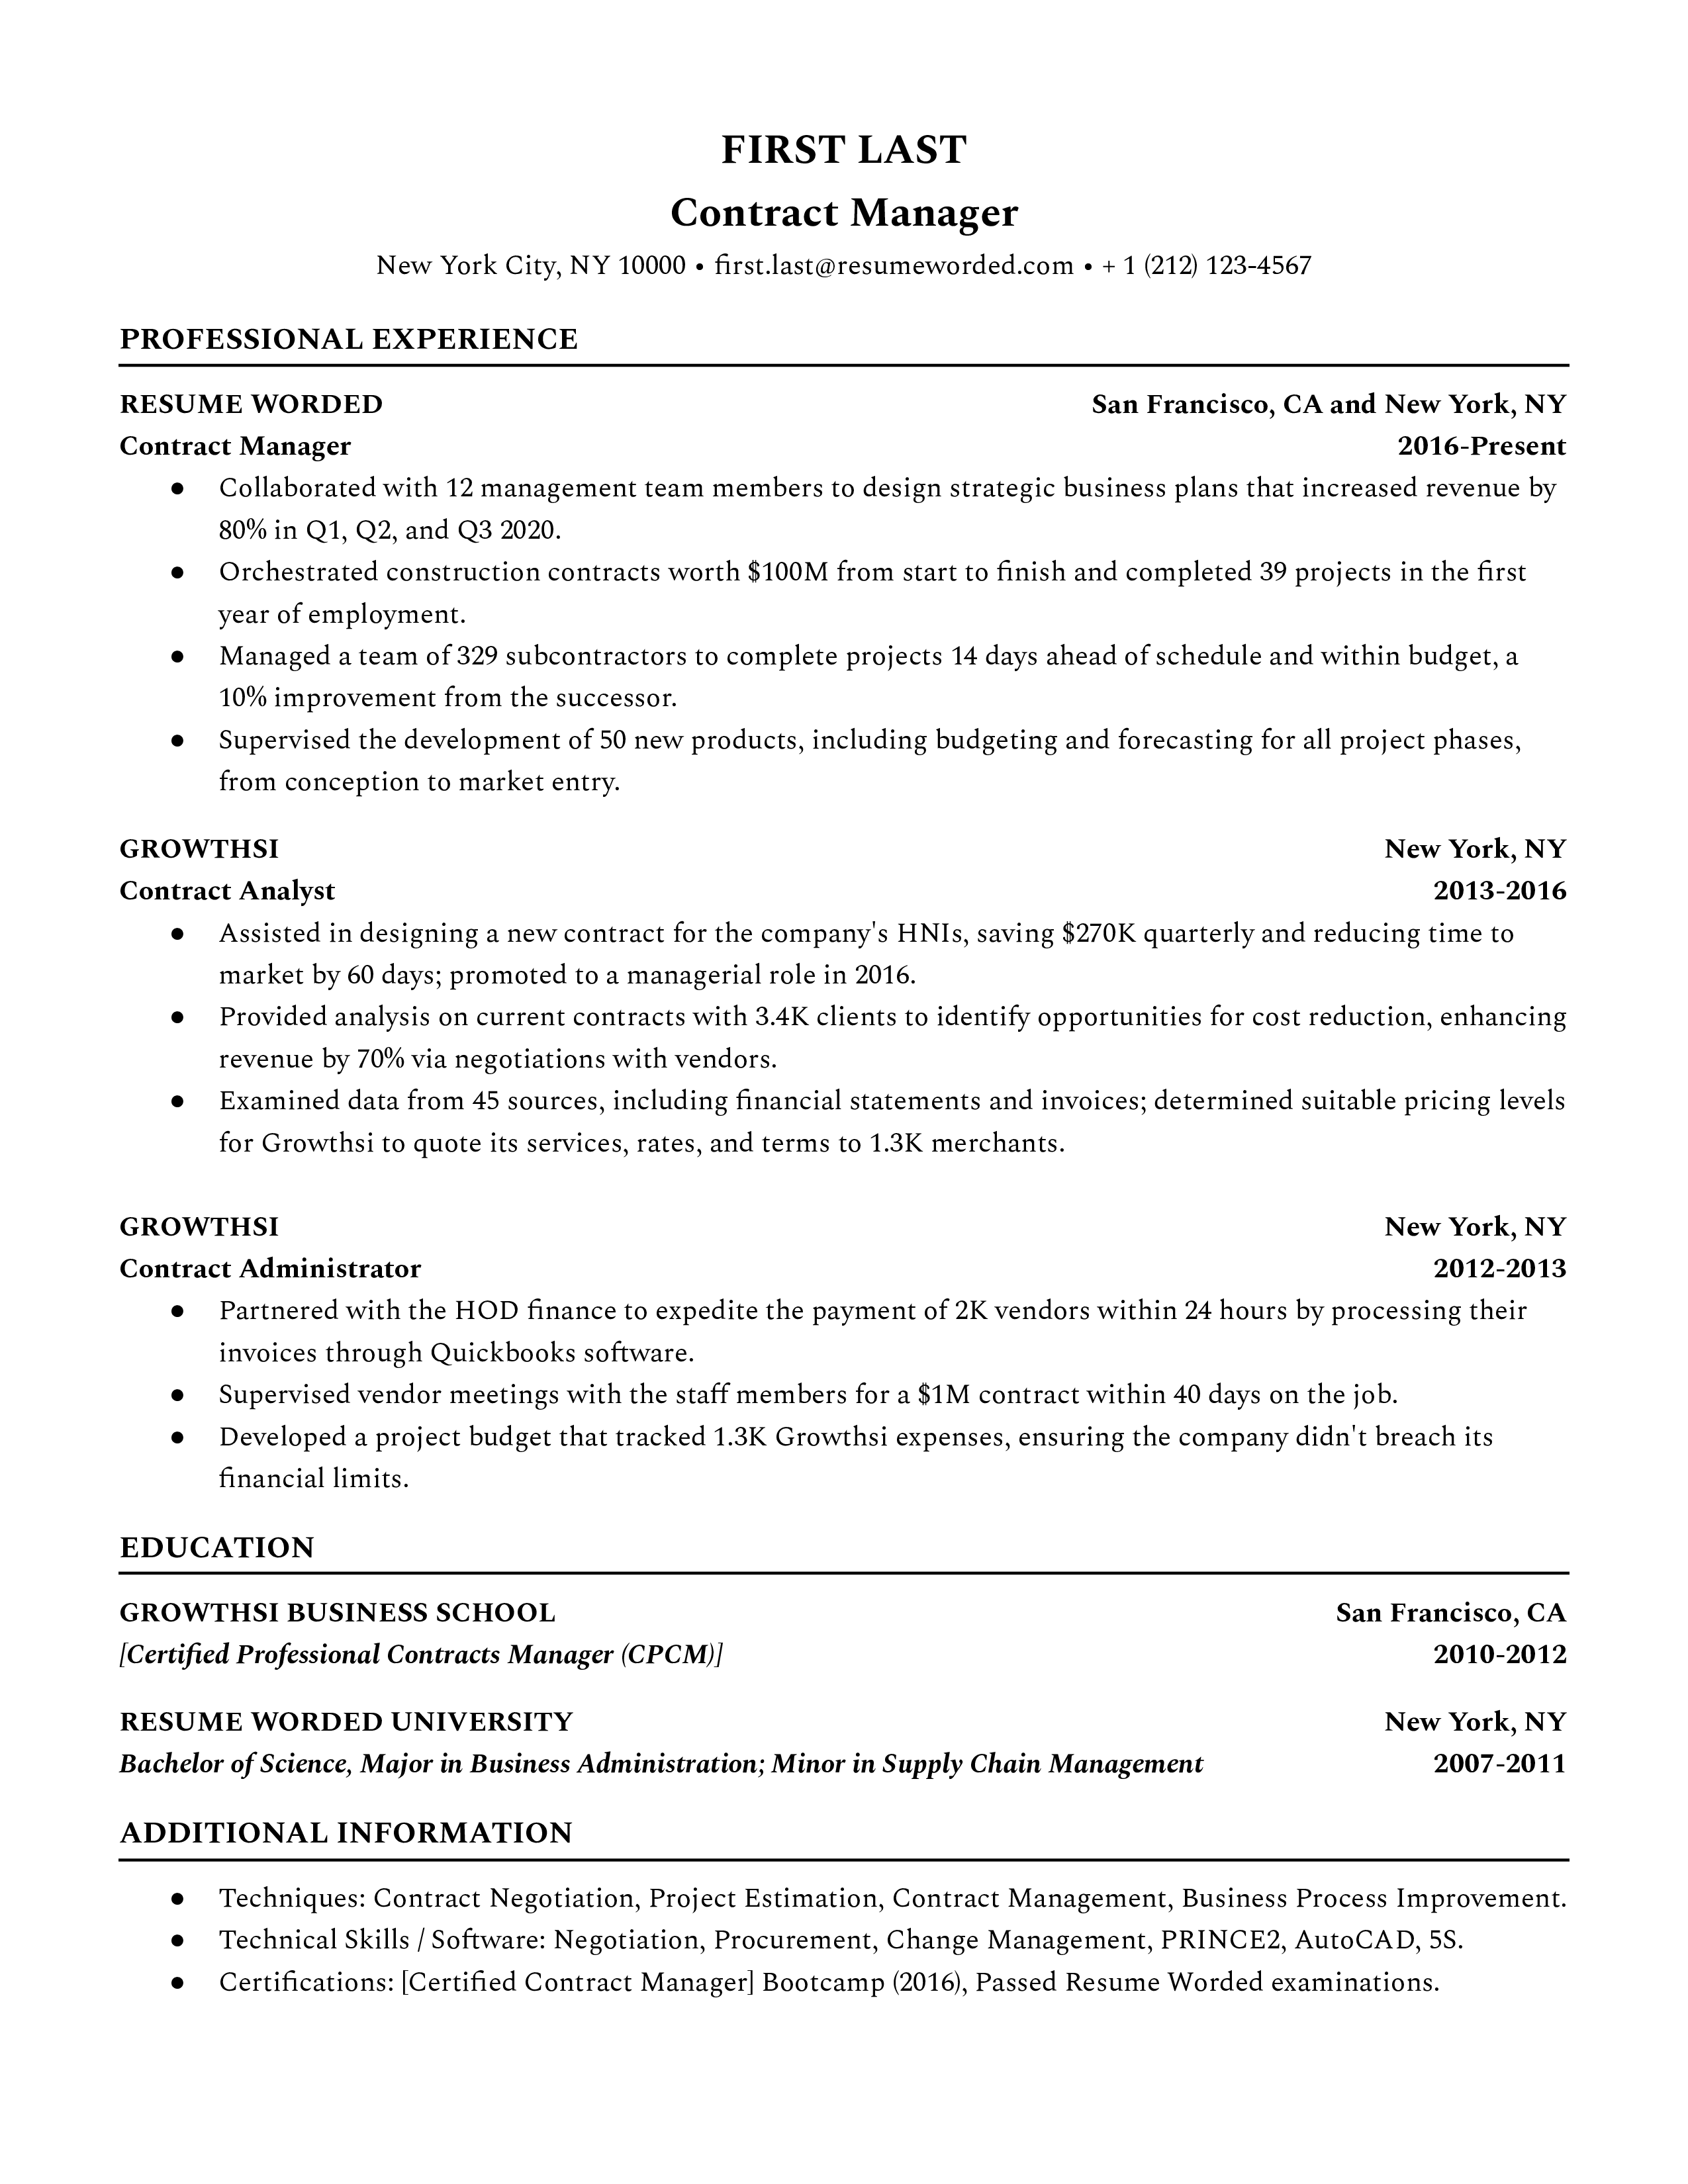 A contract manager resume sample that highlights the applicant’s career growth and strong skills section.